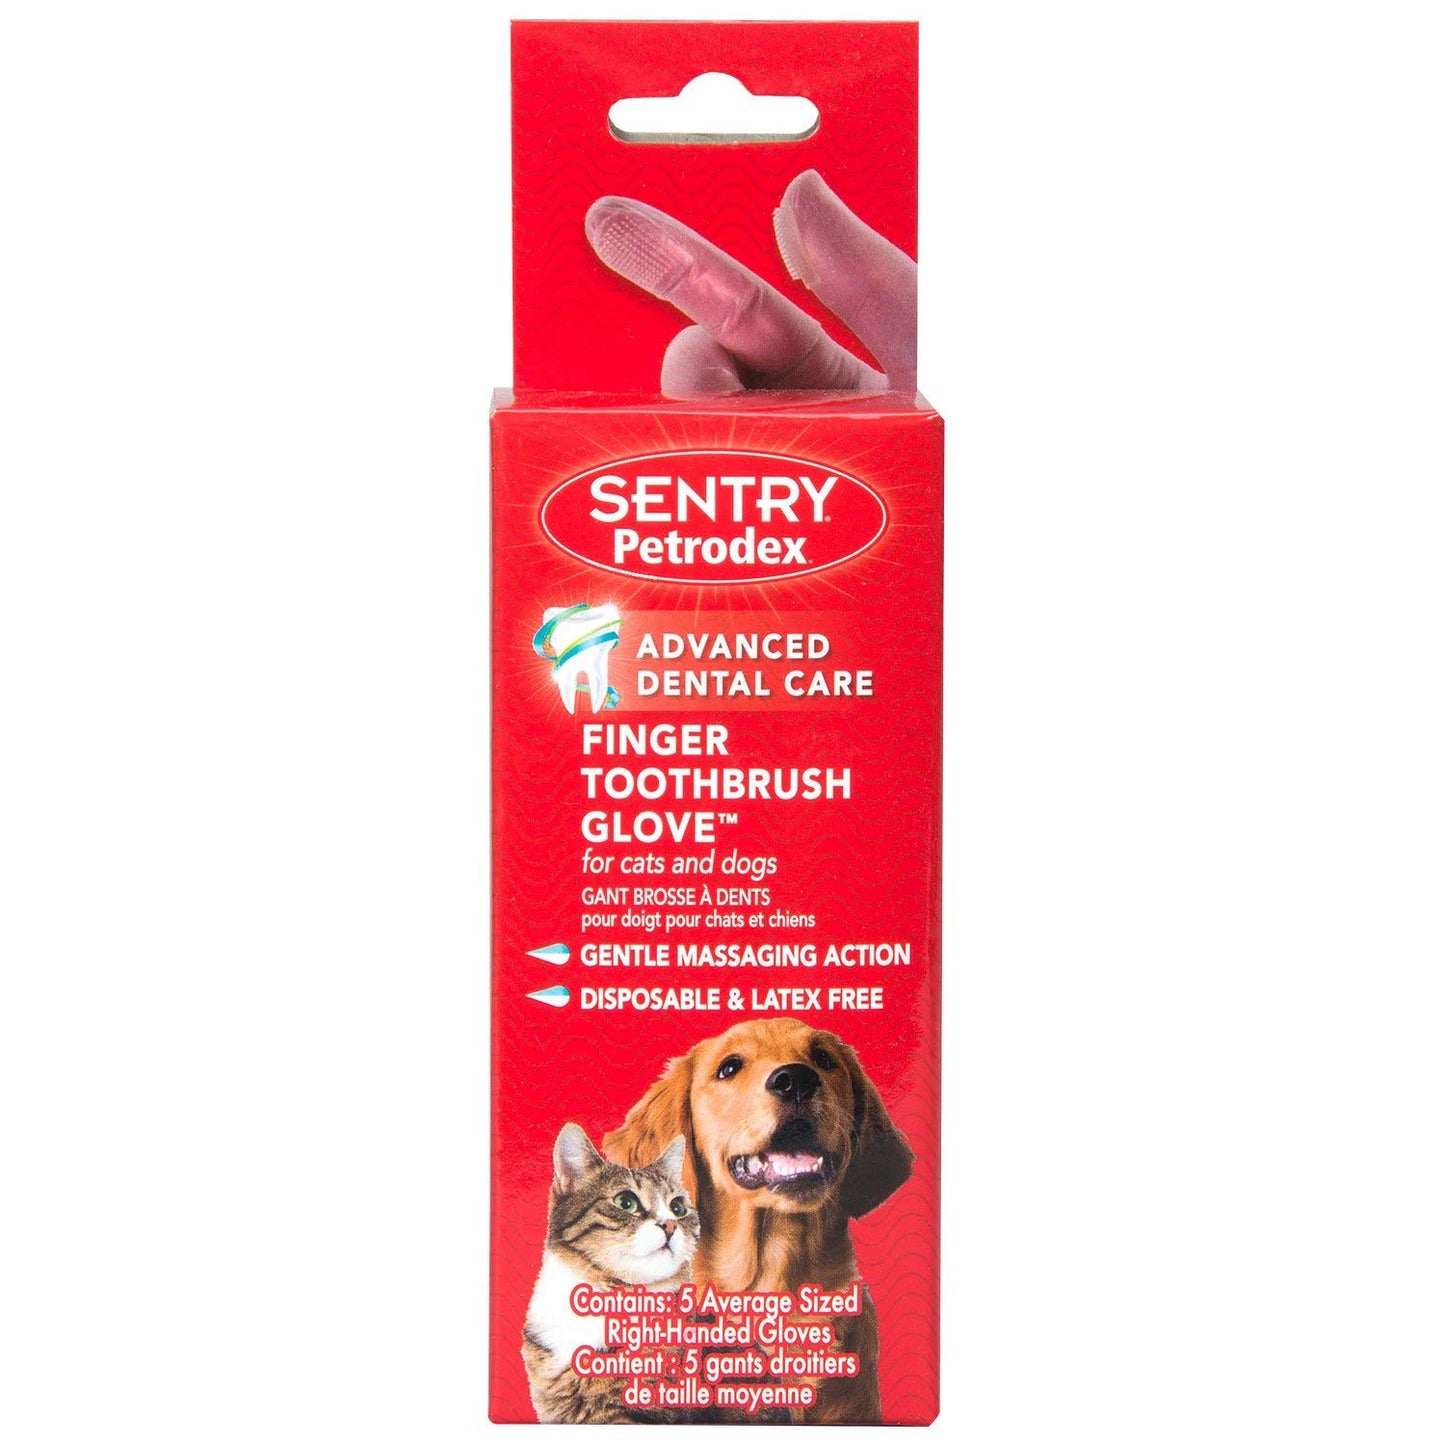 Sentry Petrodex Finger Toothbrush Glove for Cats and Dogs